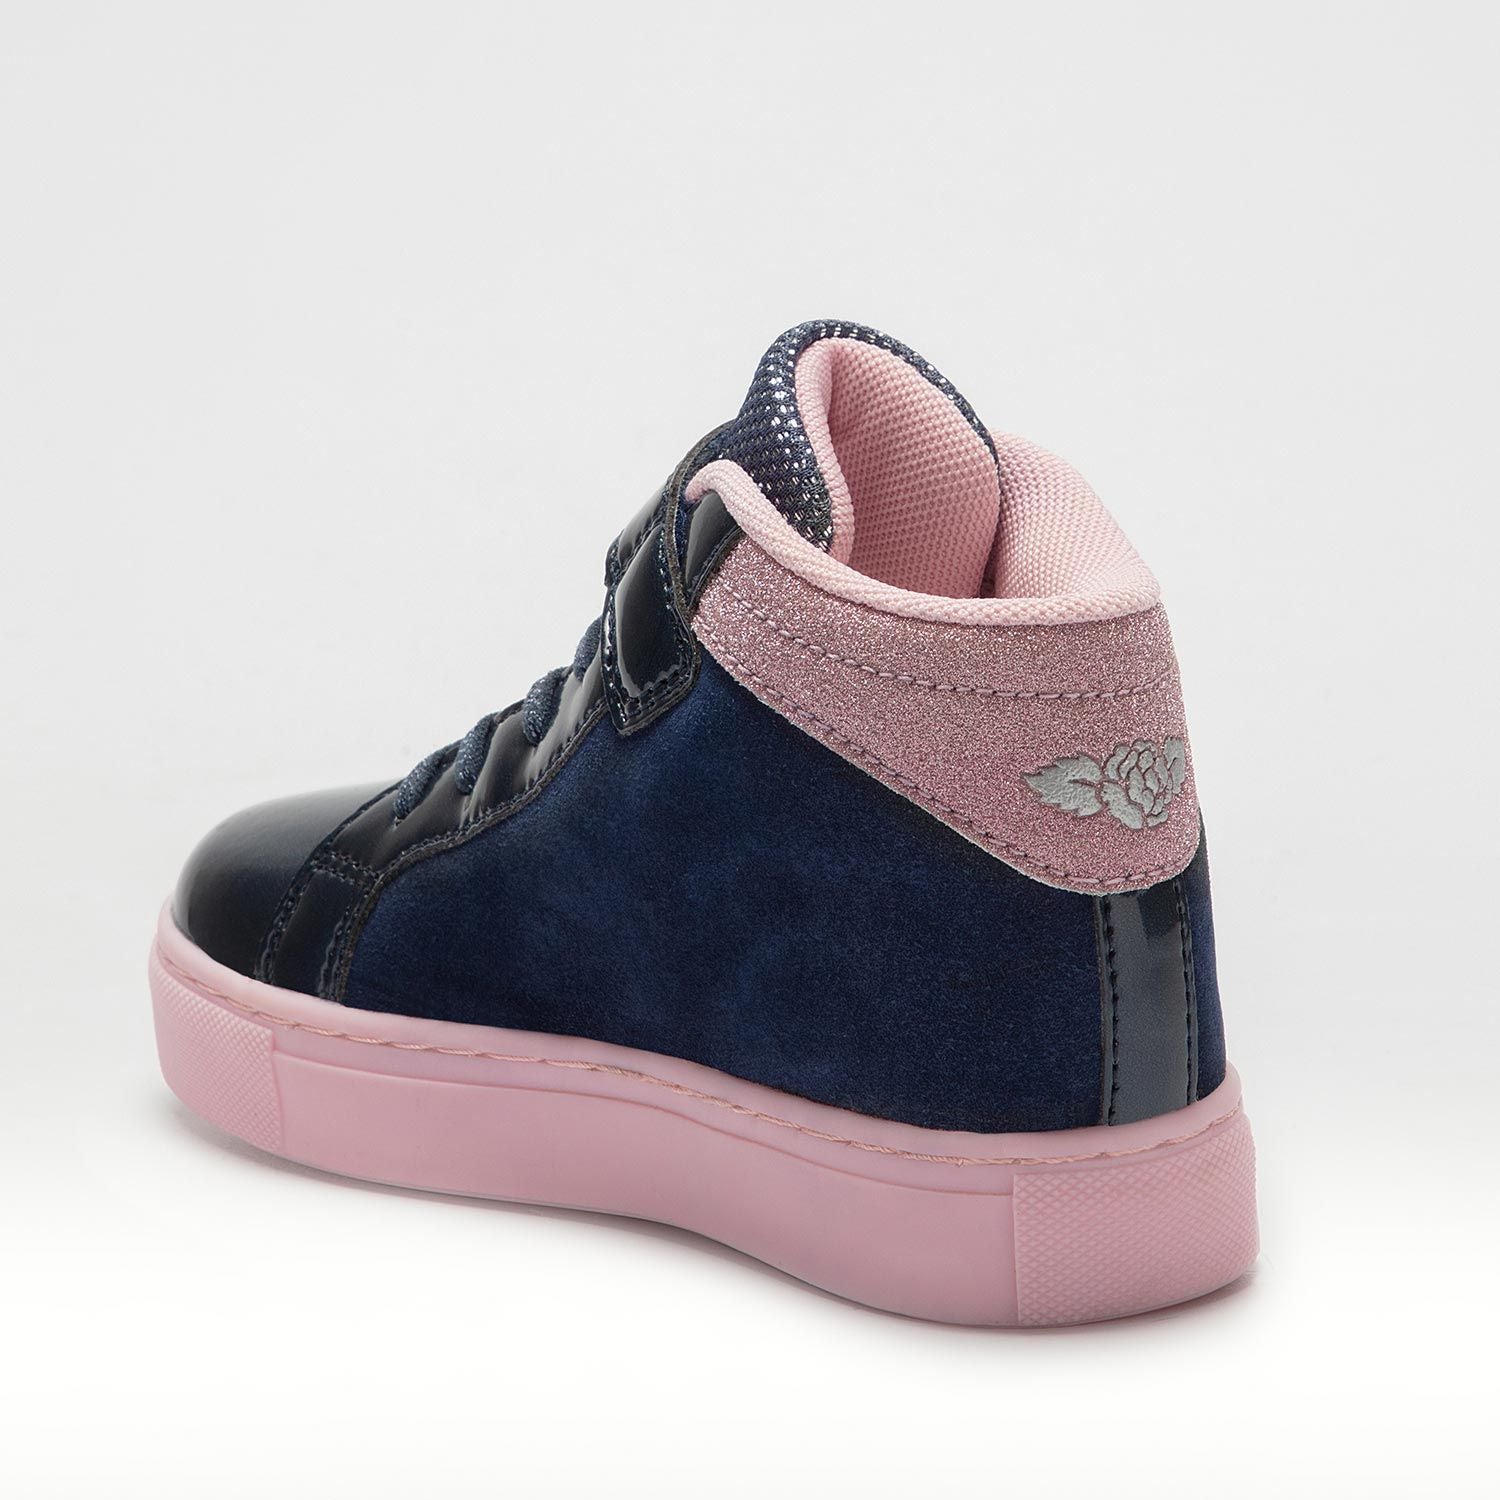 A girls hi top trainer by Lelli Kelly, style Mille Stelle, in navy and pink suede/patent with faux lace and velcro fastening. Angled view.